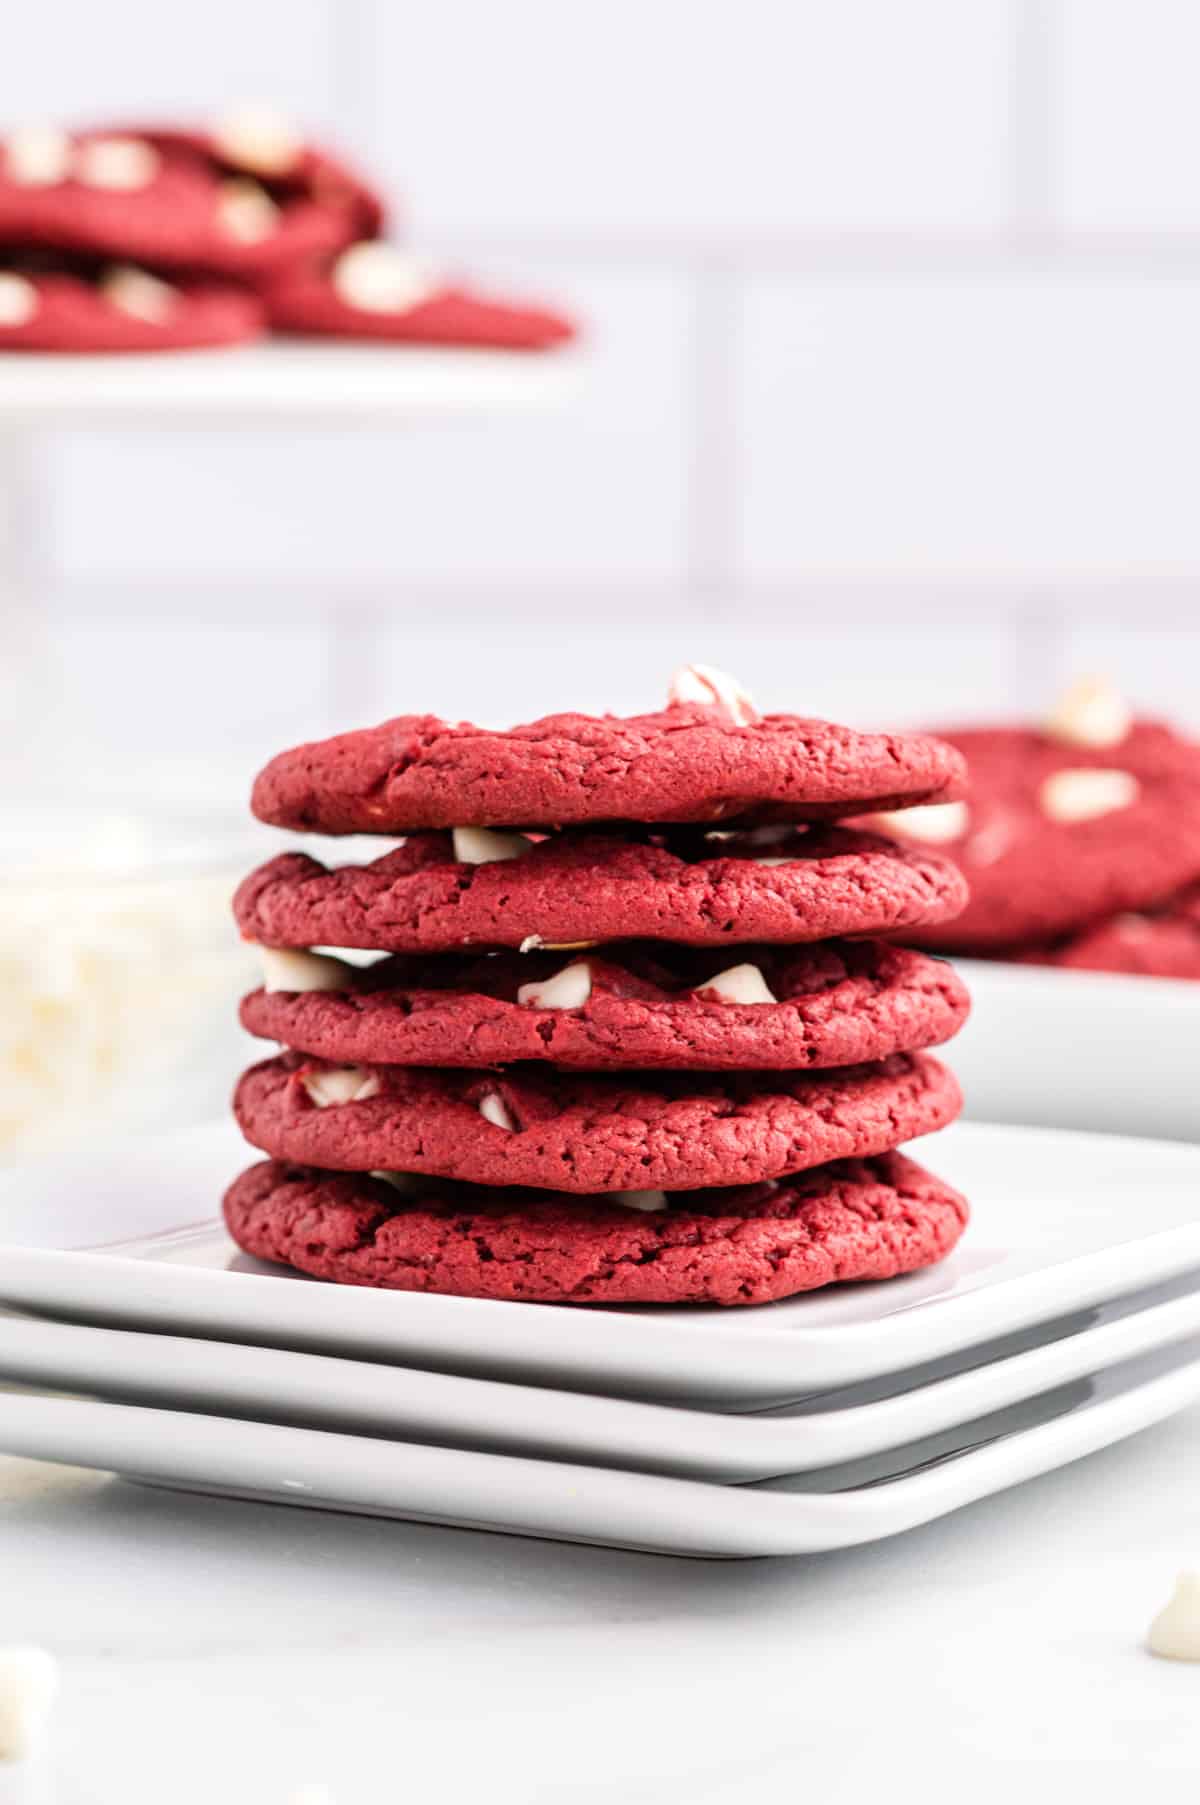 Red velvet white chocolate cookies stacked on white plates. More cookies can be seen in background.